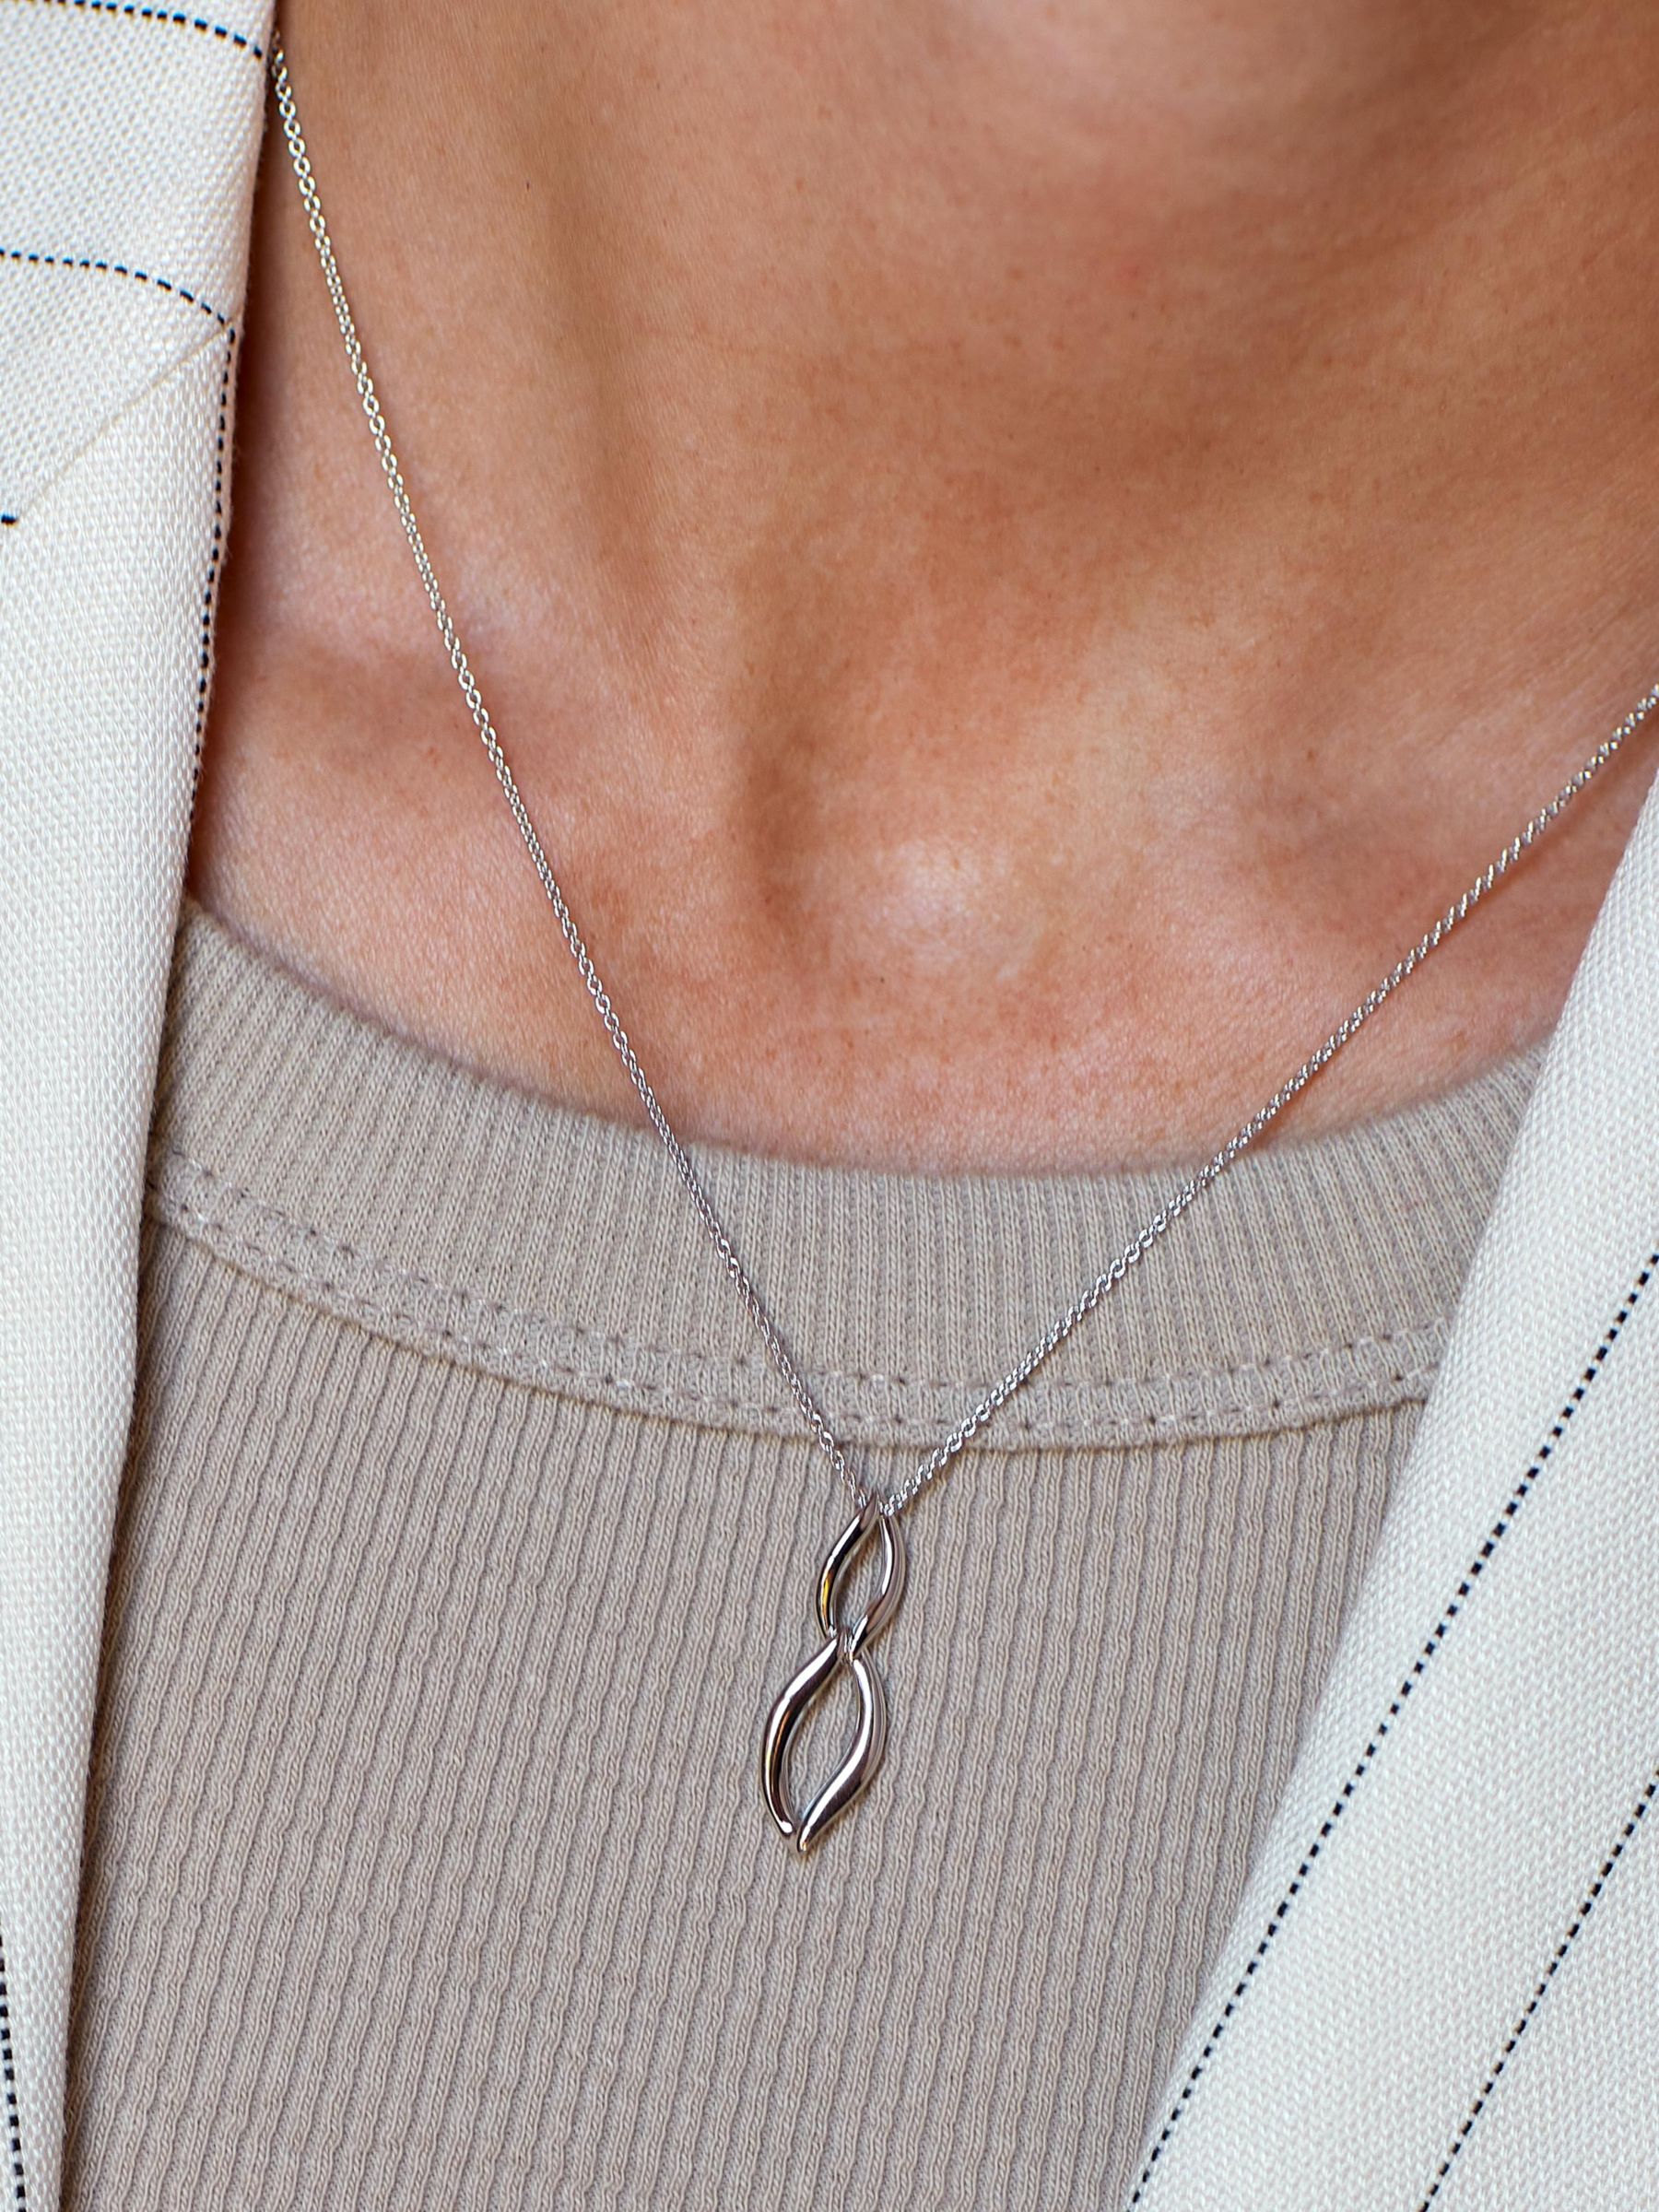 Buy Kit Heath Entwine Twine Duo Link Pendant Necklace, Silver Online at johnlewis.com